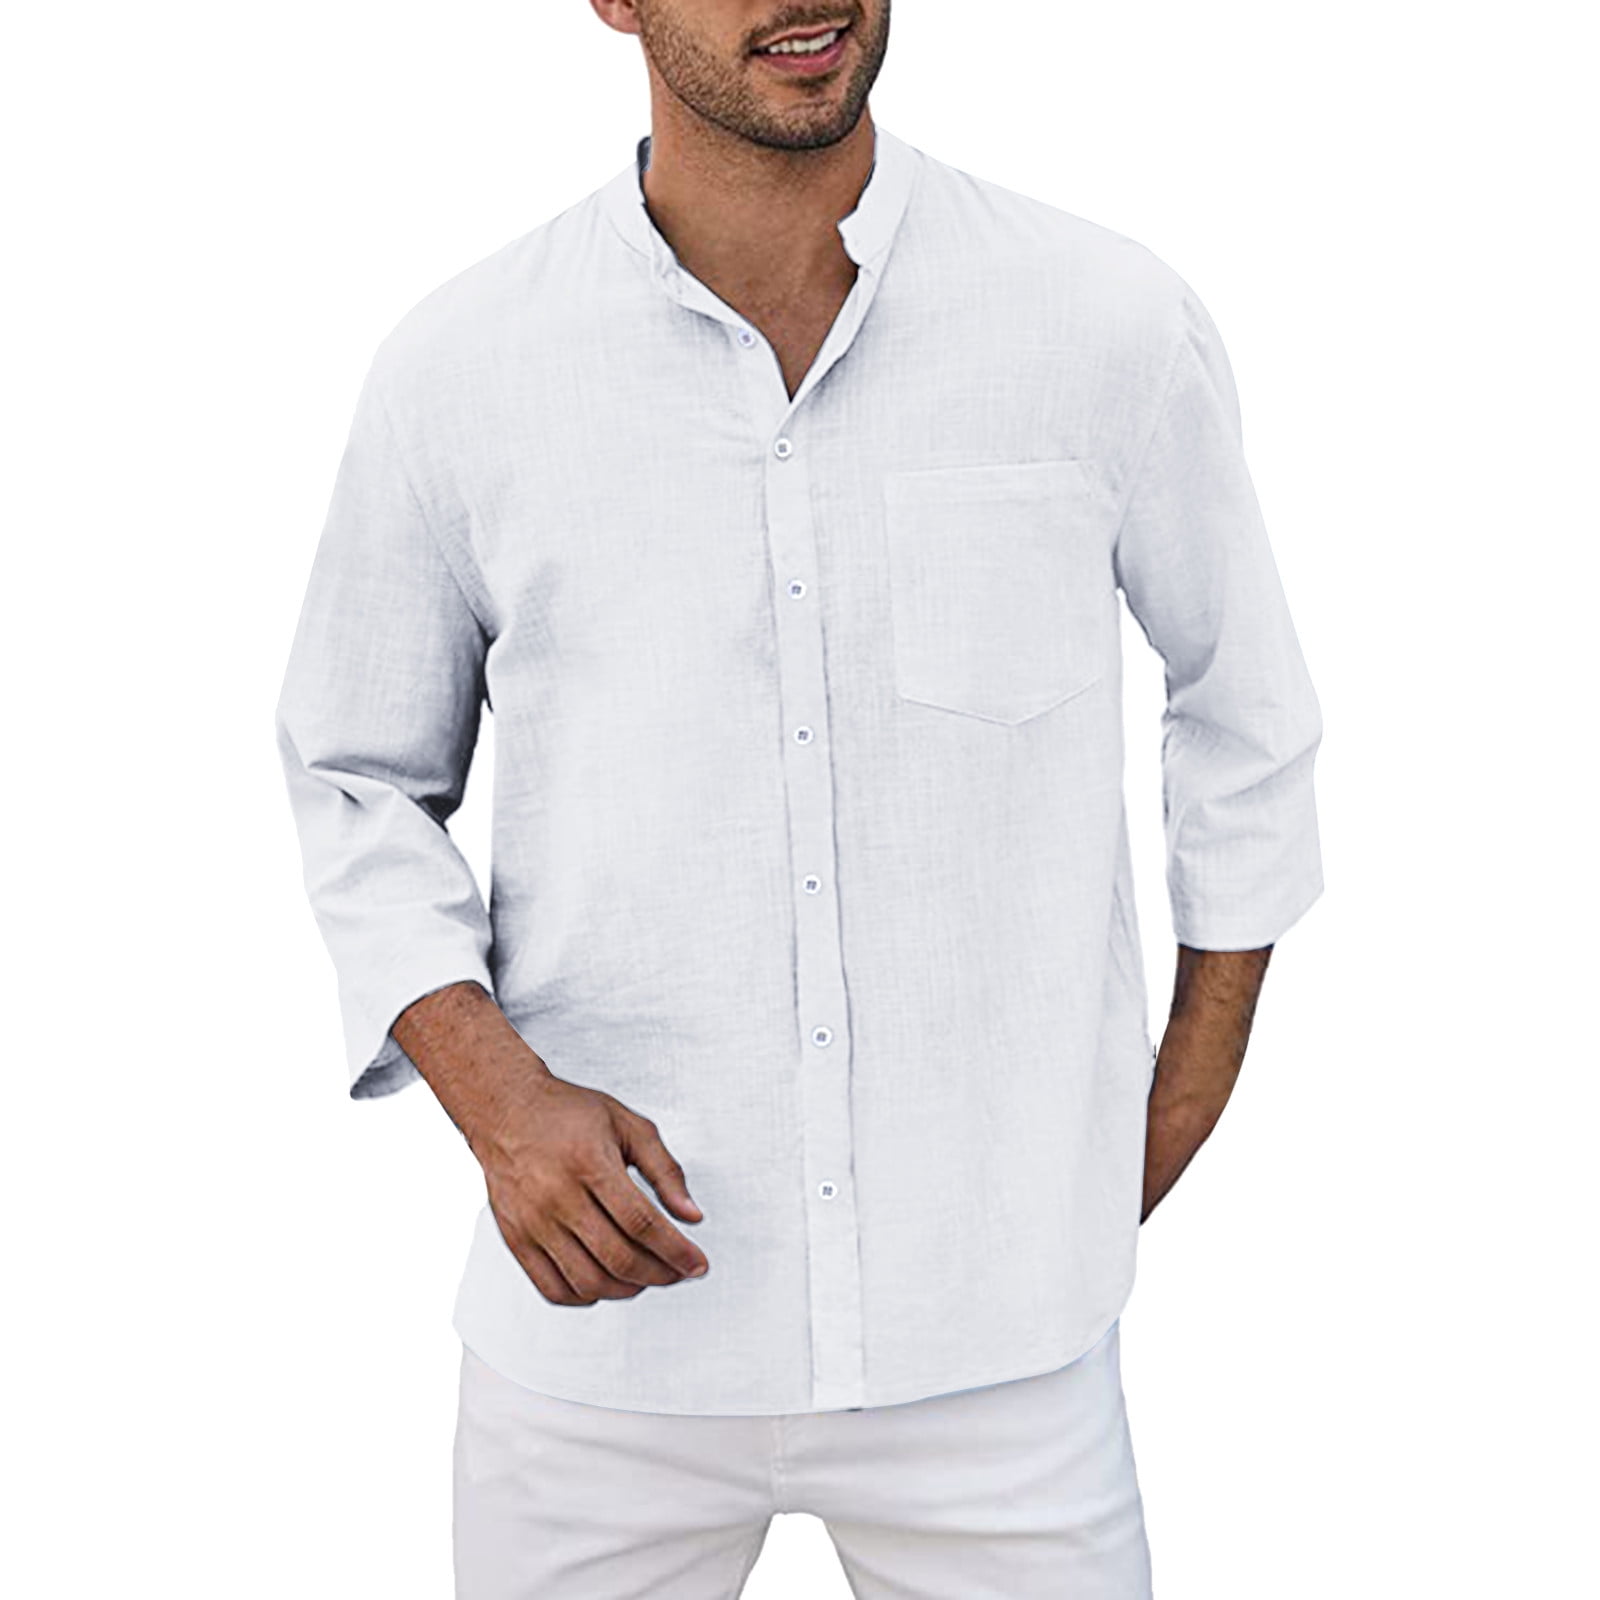 dmqupv T Shirts with Pockets Mens Fashion Casual Cotton And Linen Buckle  Solid Color Nine Sleeve Shirt Shirt Top button-down-shirts White X-Large -  Walmart.com